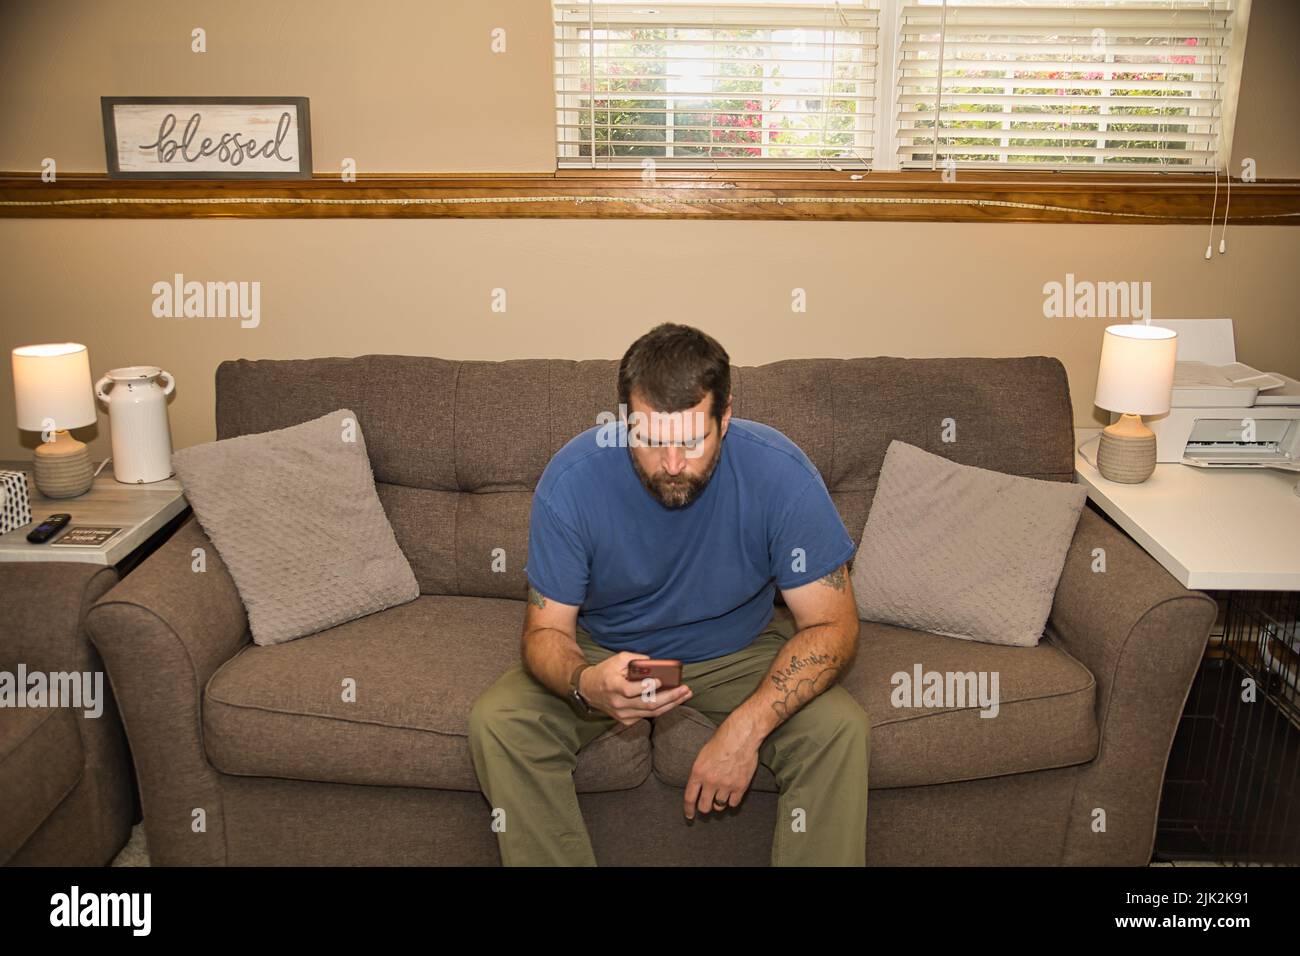 This dark haired bearded man is looking at his phone while sitting on the gray couch. Stock Photo